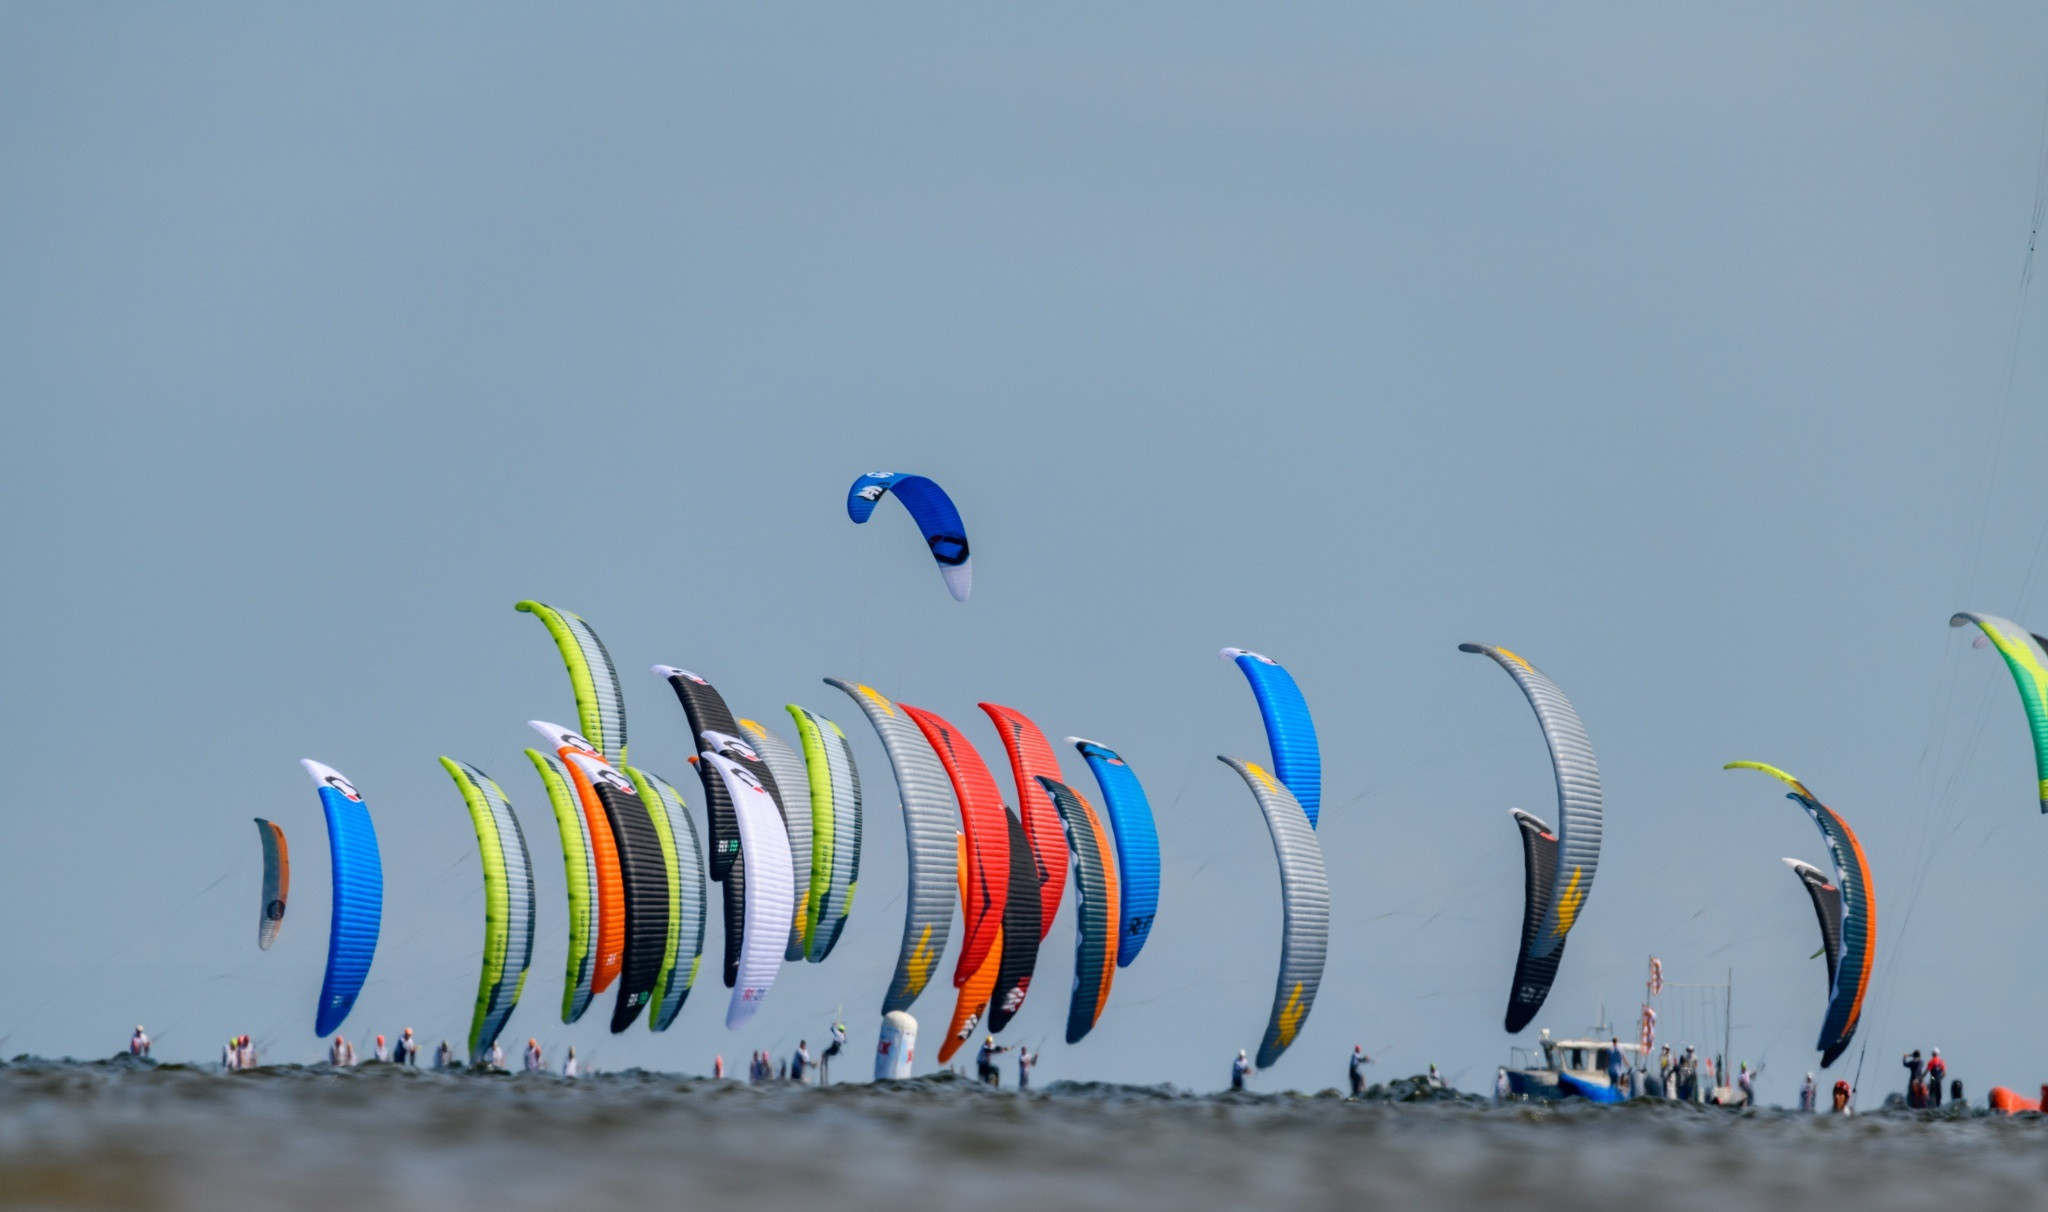 Competition is set to continue tomorrow before the medal races on Sunday ©Eureka/Dominik Kalamus